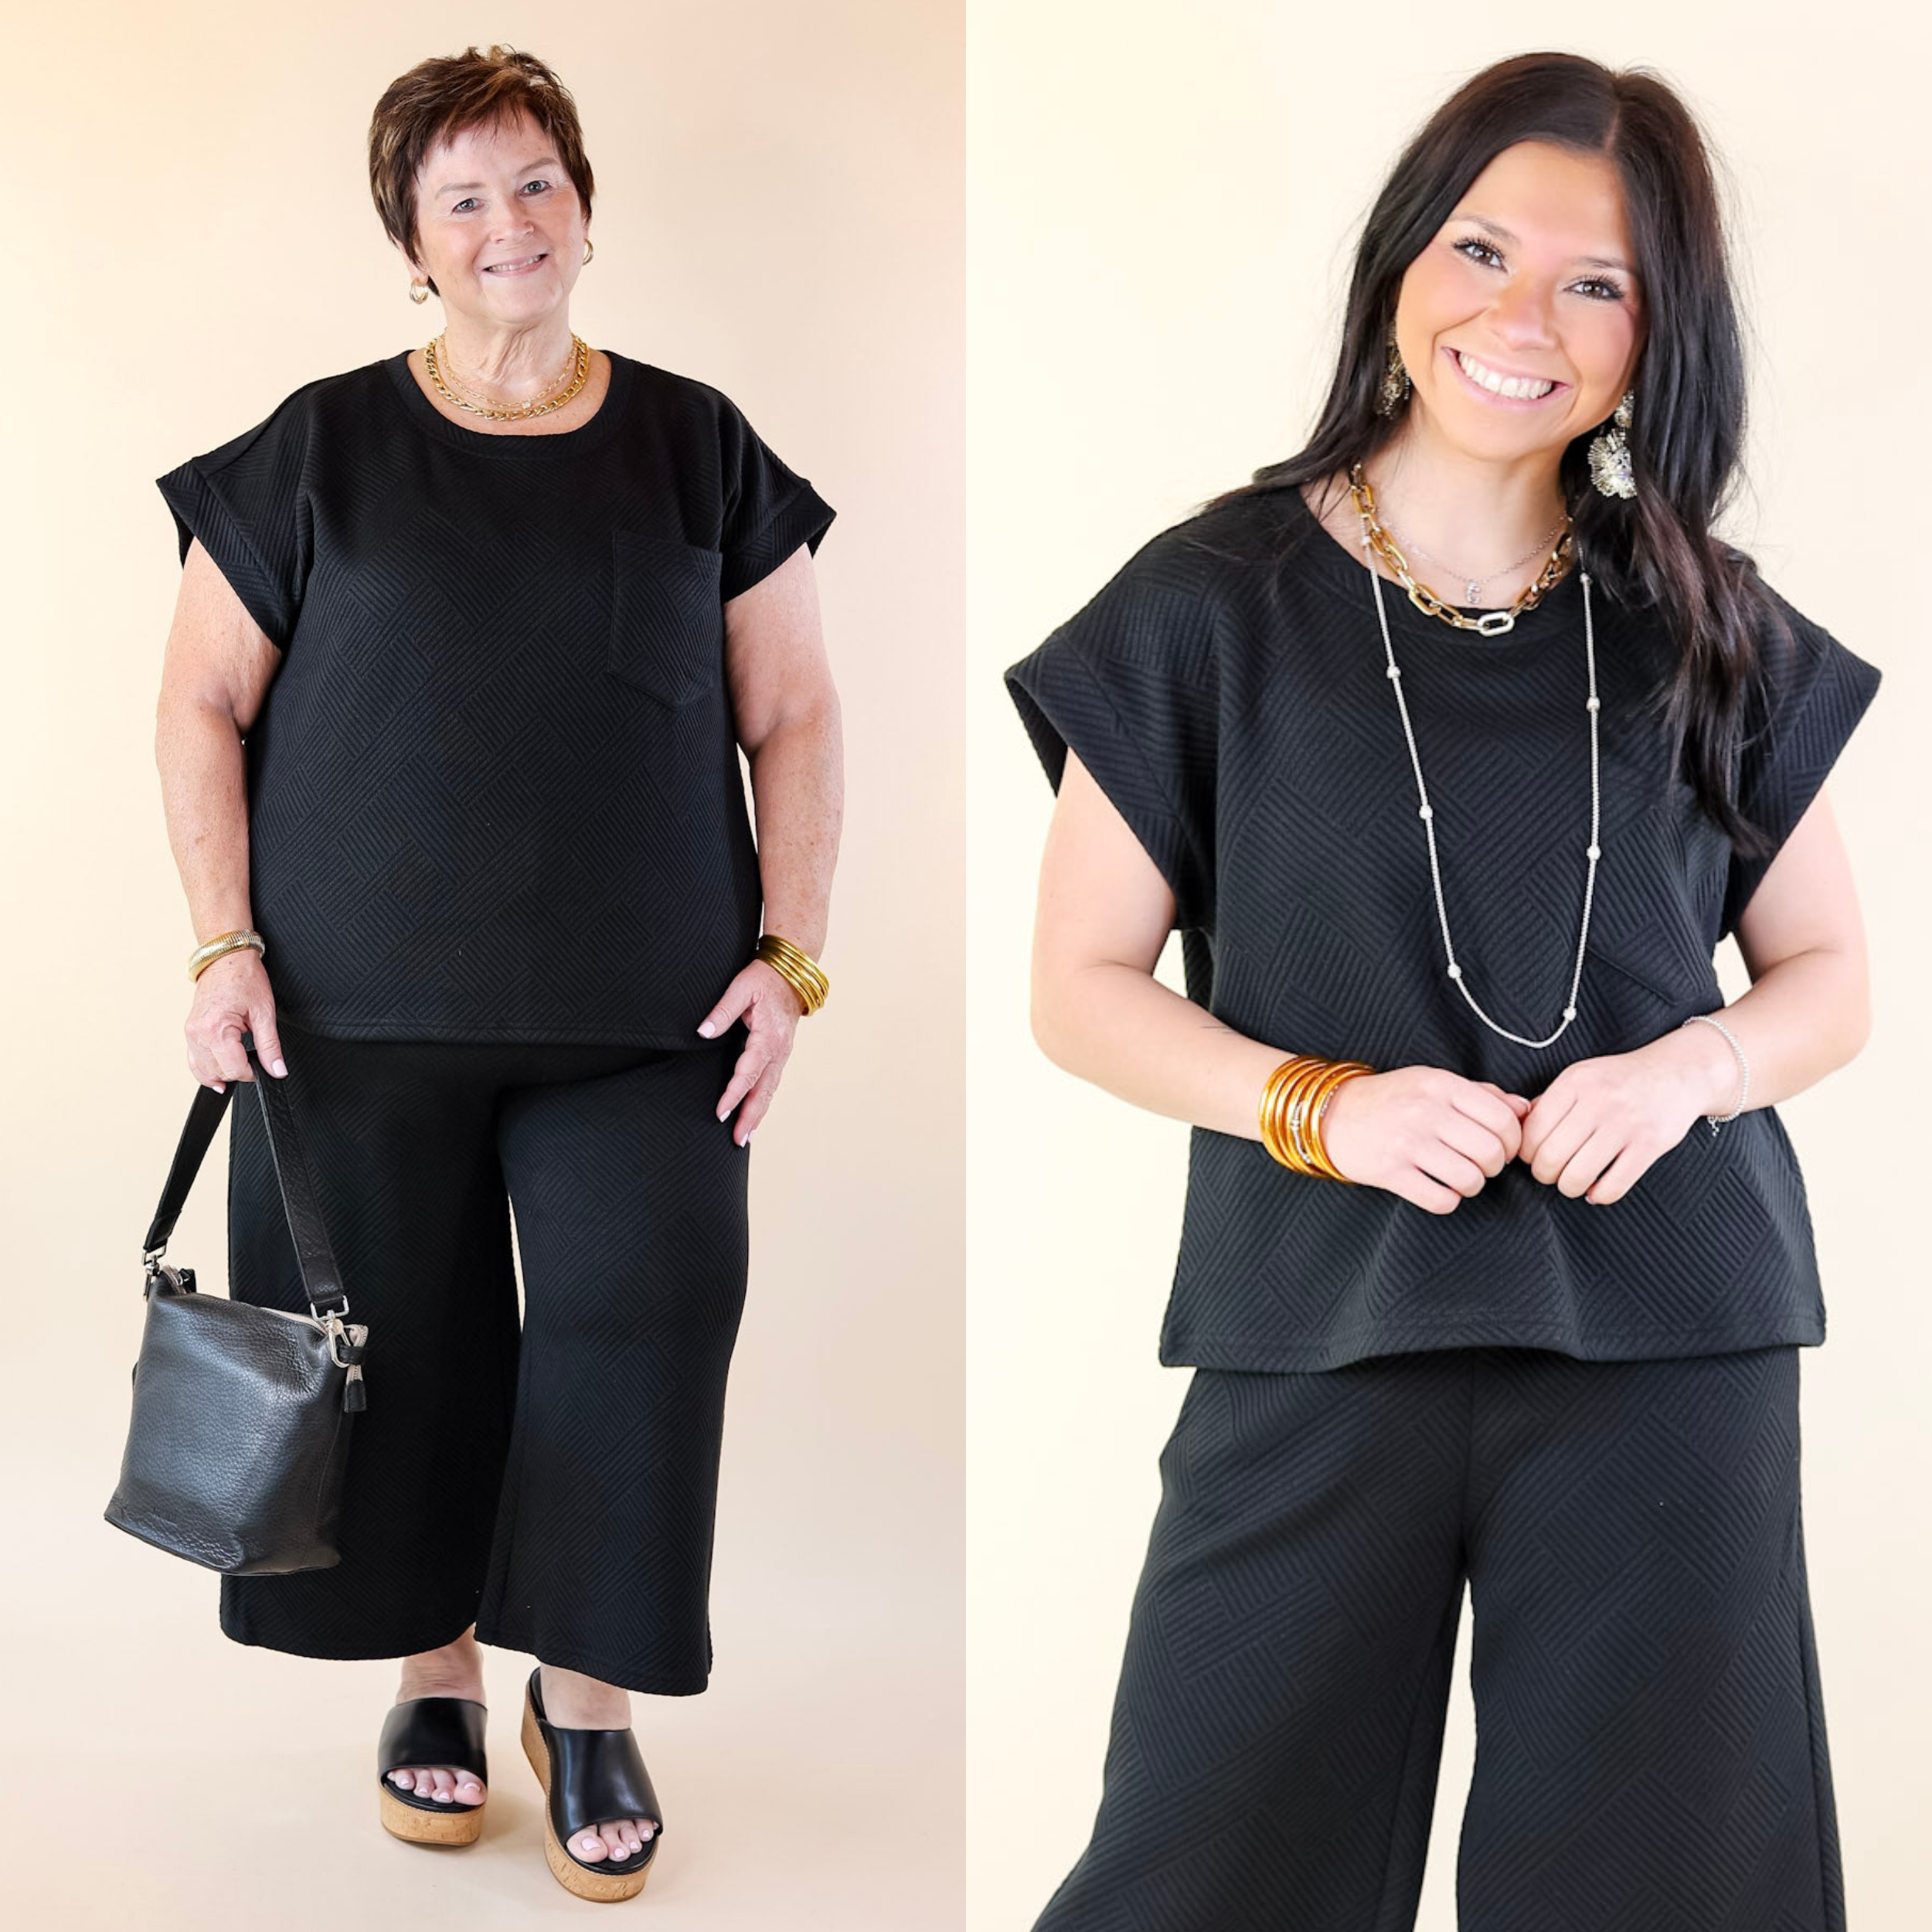 Glamour on the Go Textured Top with Pocket in Black